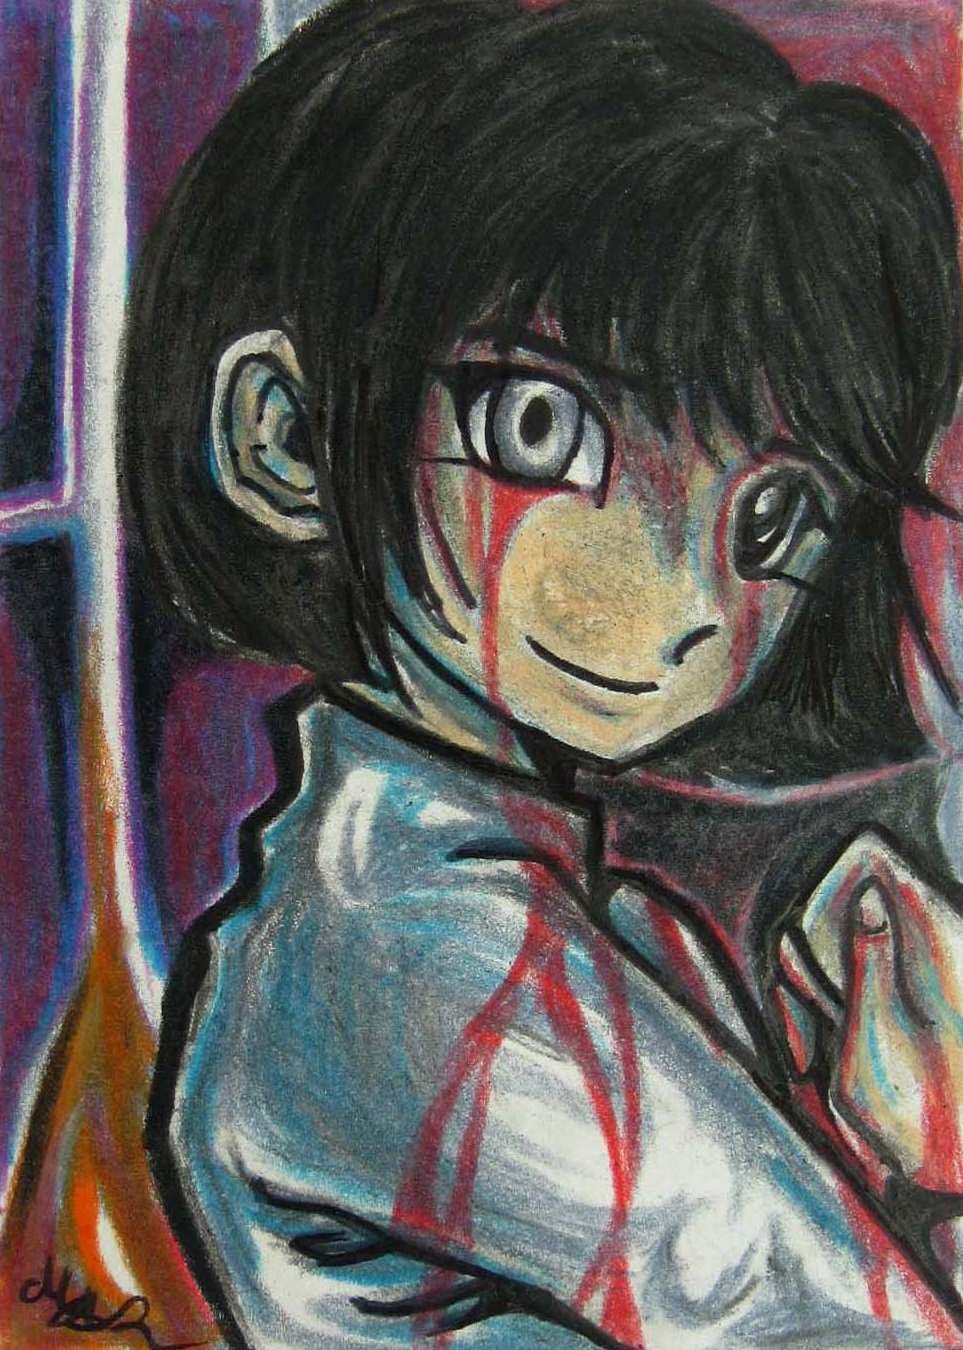 Original Concept Art "Sweetbitter" Creepy Dark Horror Sketch Card Drawing ACEO PSC 1/1 by Maia